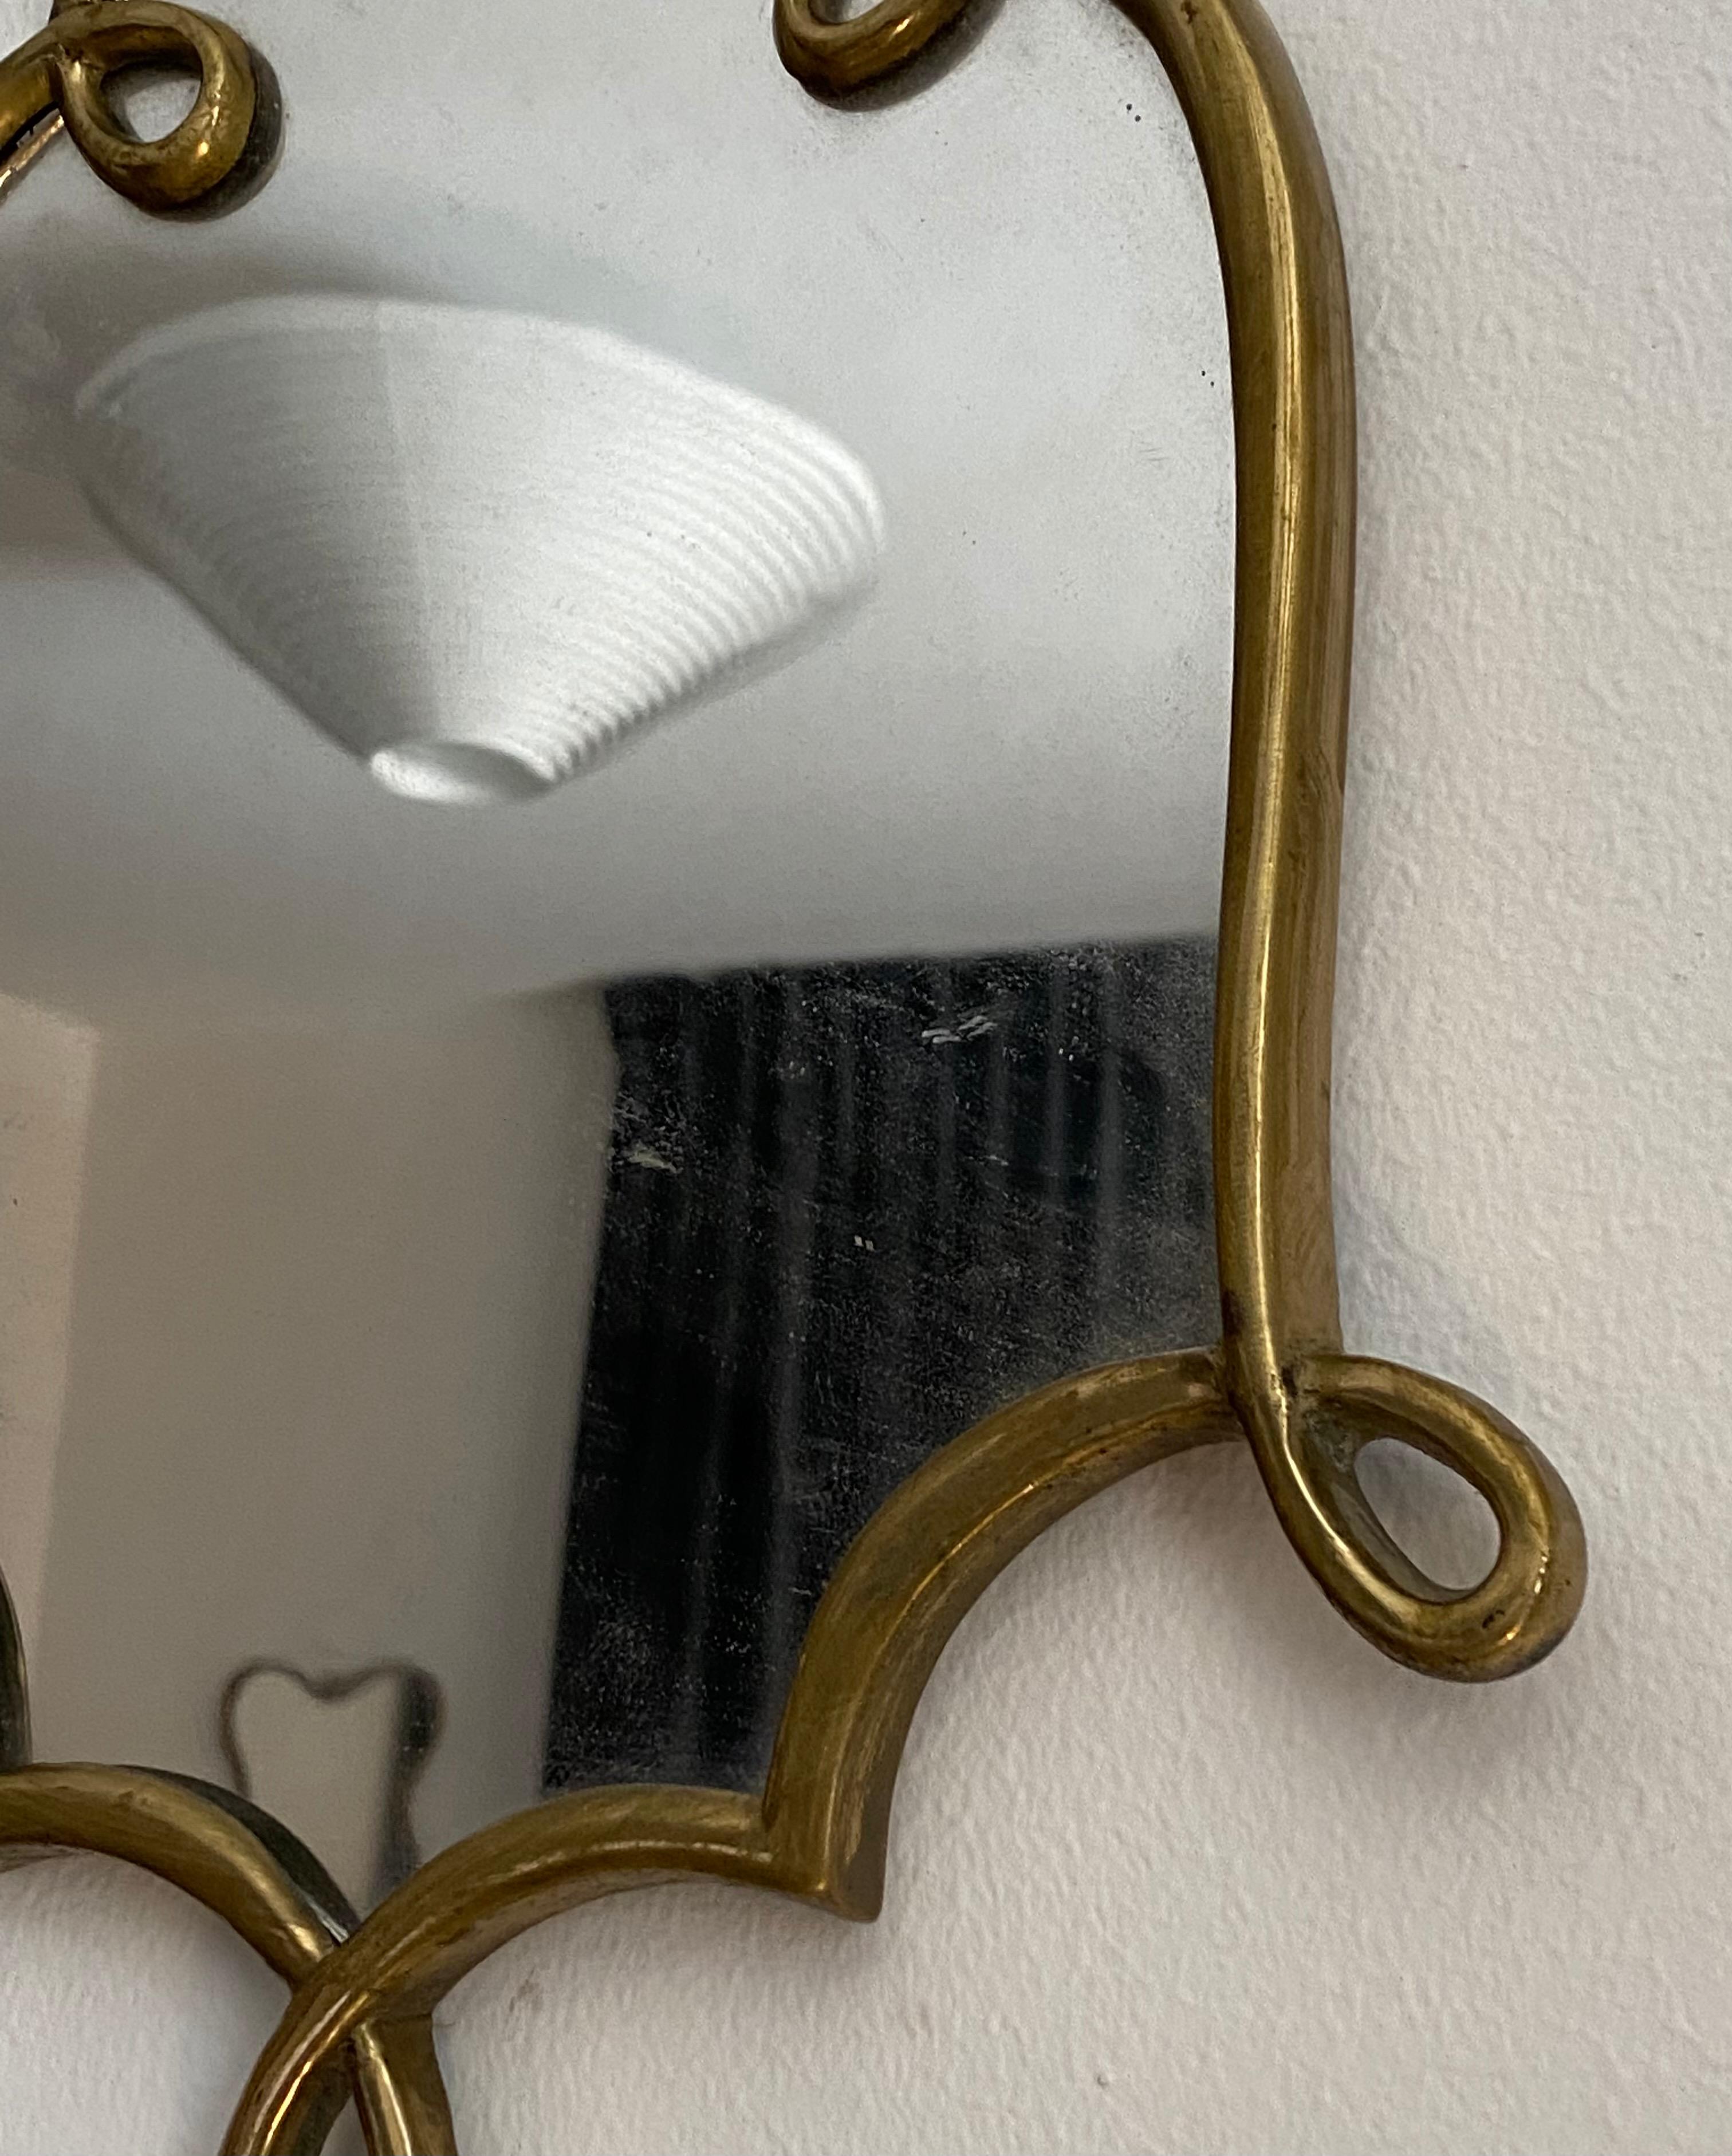 A small organic wall mirror, produced in Italy, 1940s. Organically cut mirror glass is framed.

Other designers of the period include Gio Ponti, Fontana Arte, Max Ingrand, Franco Albini, and Josef Frank.